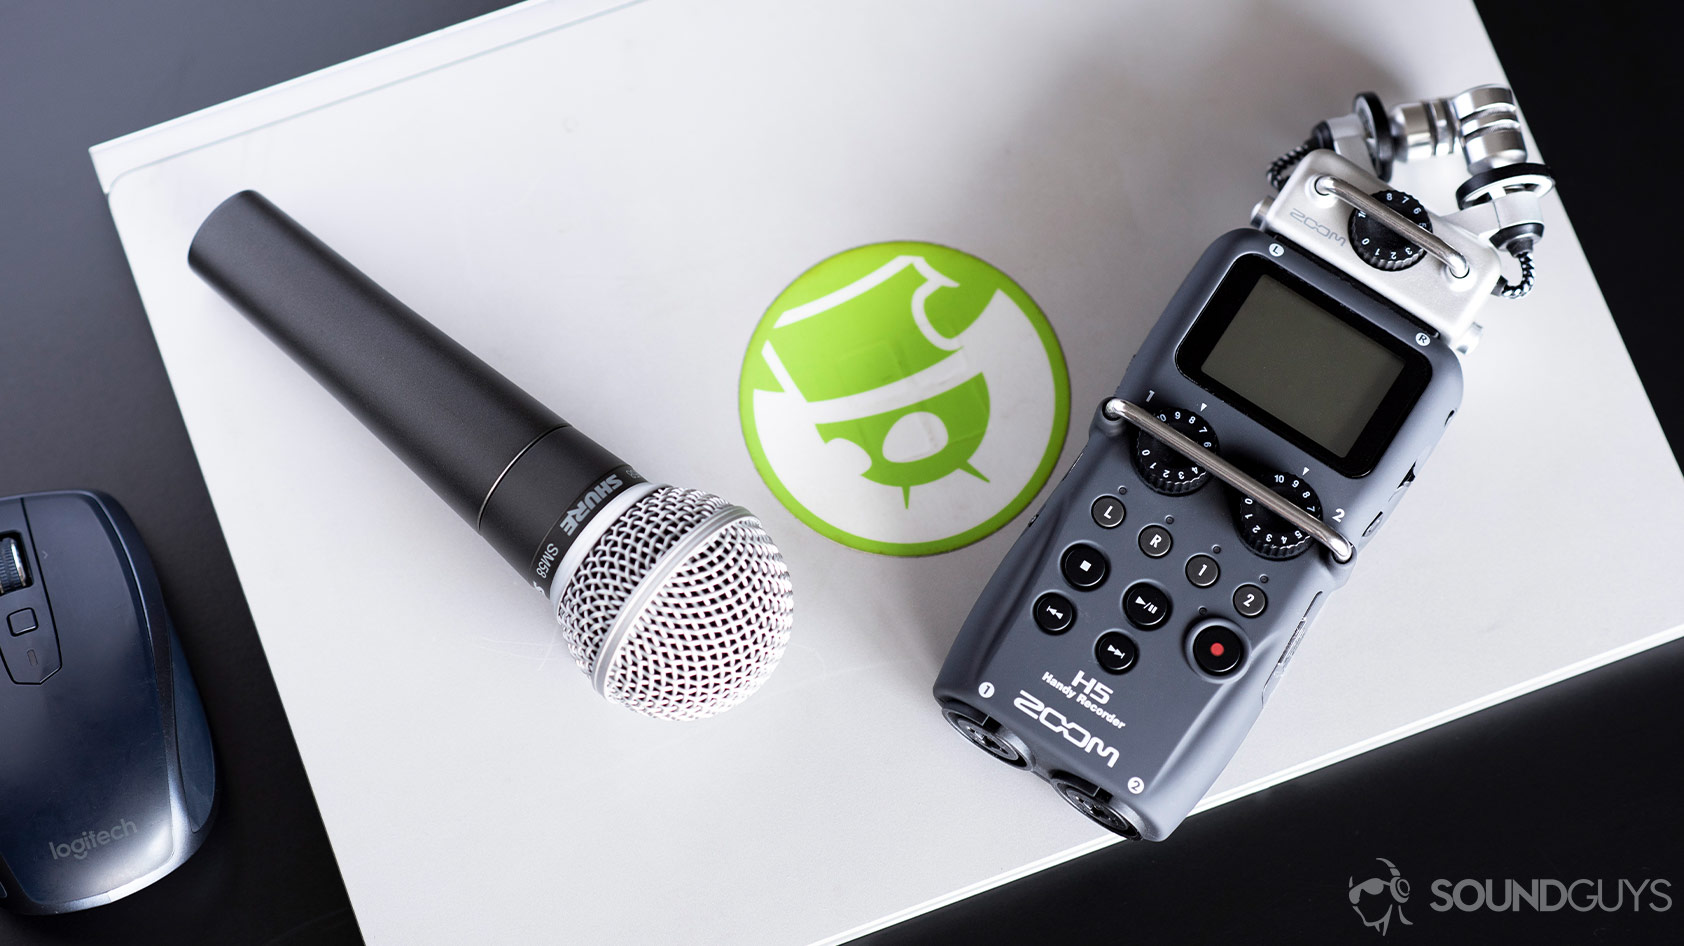 The Shure SM58 microphone next to a Zoom H5 handheld voice recorder.